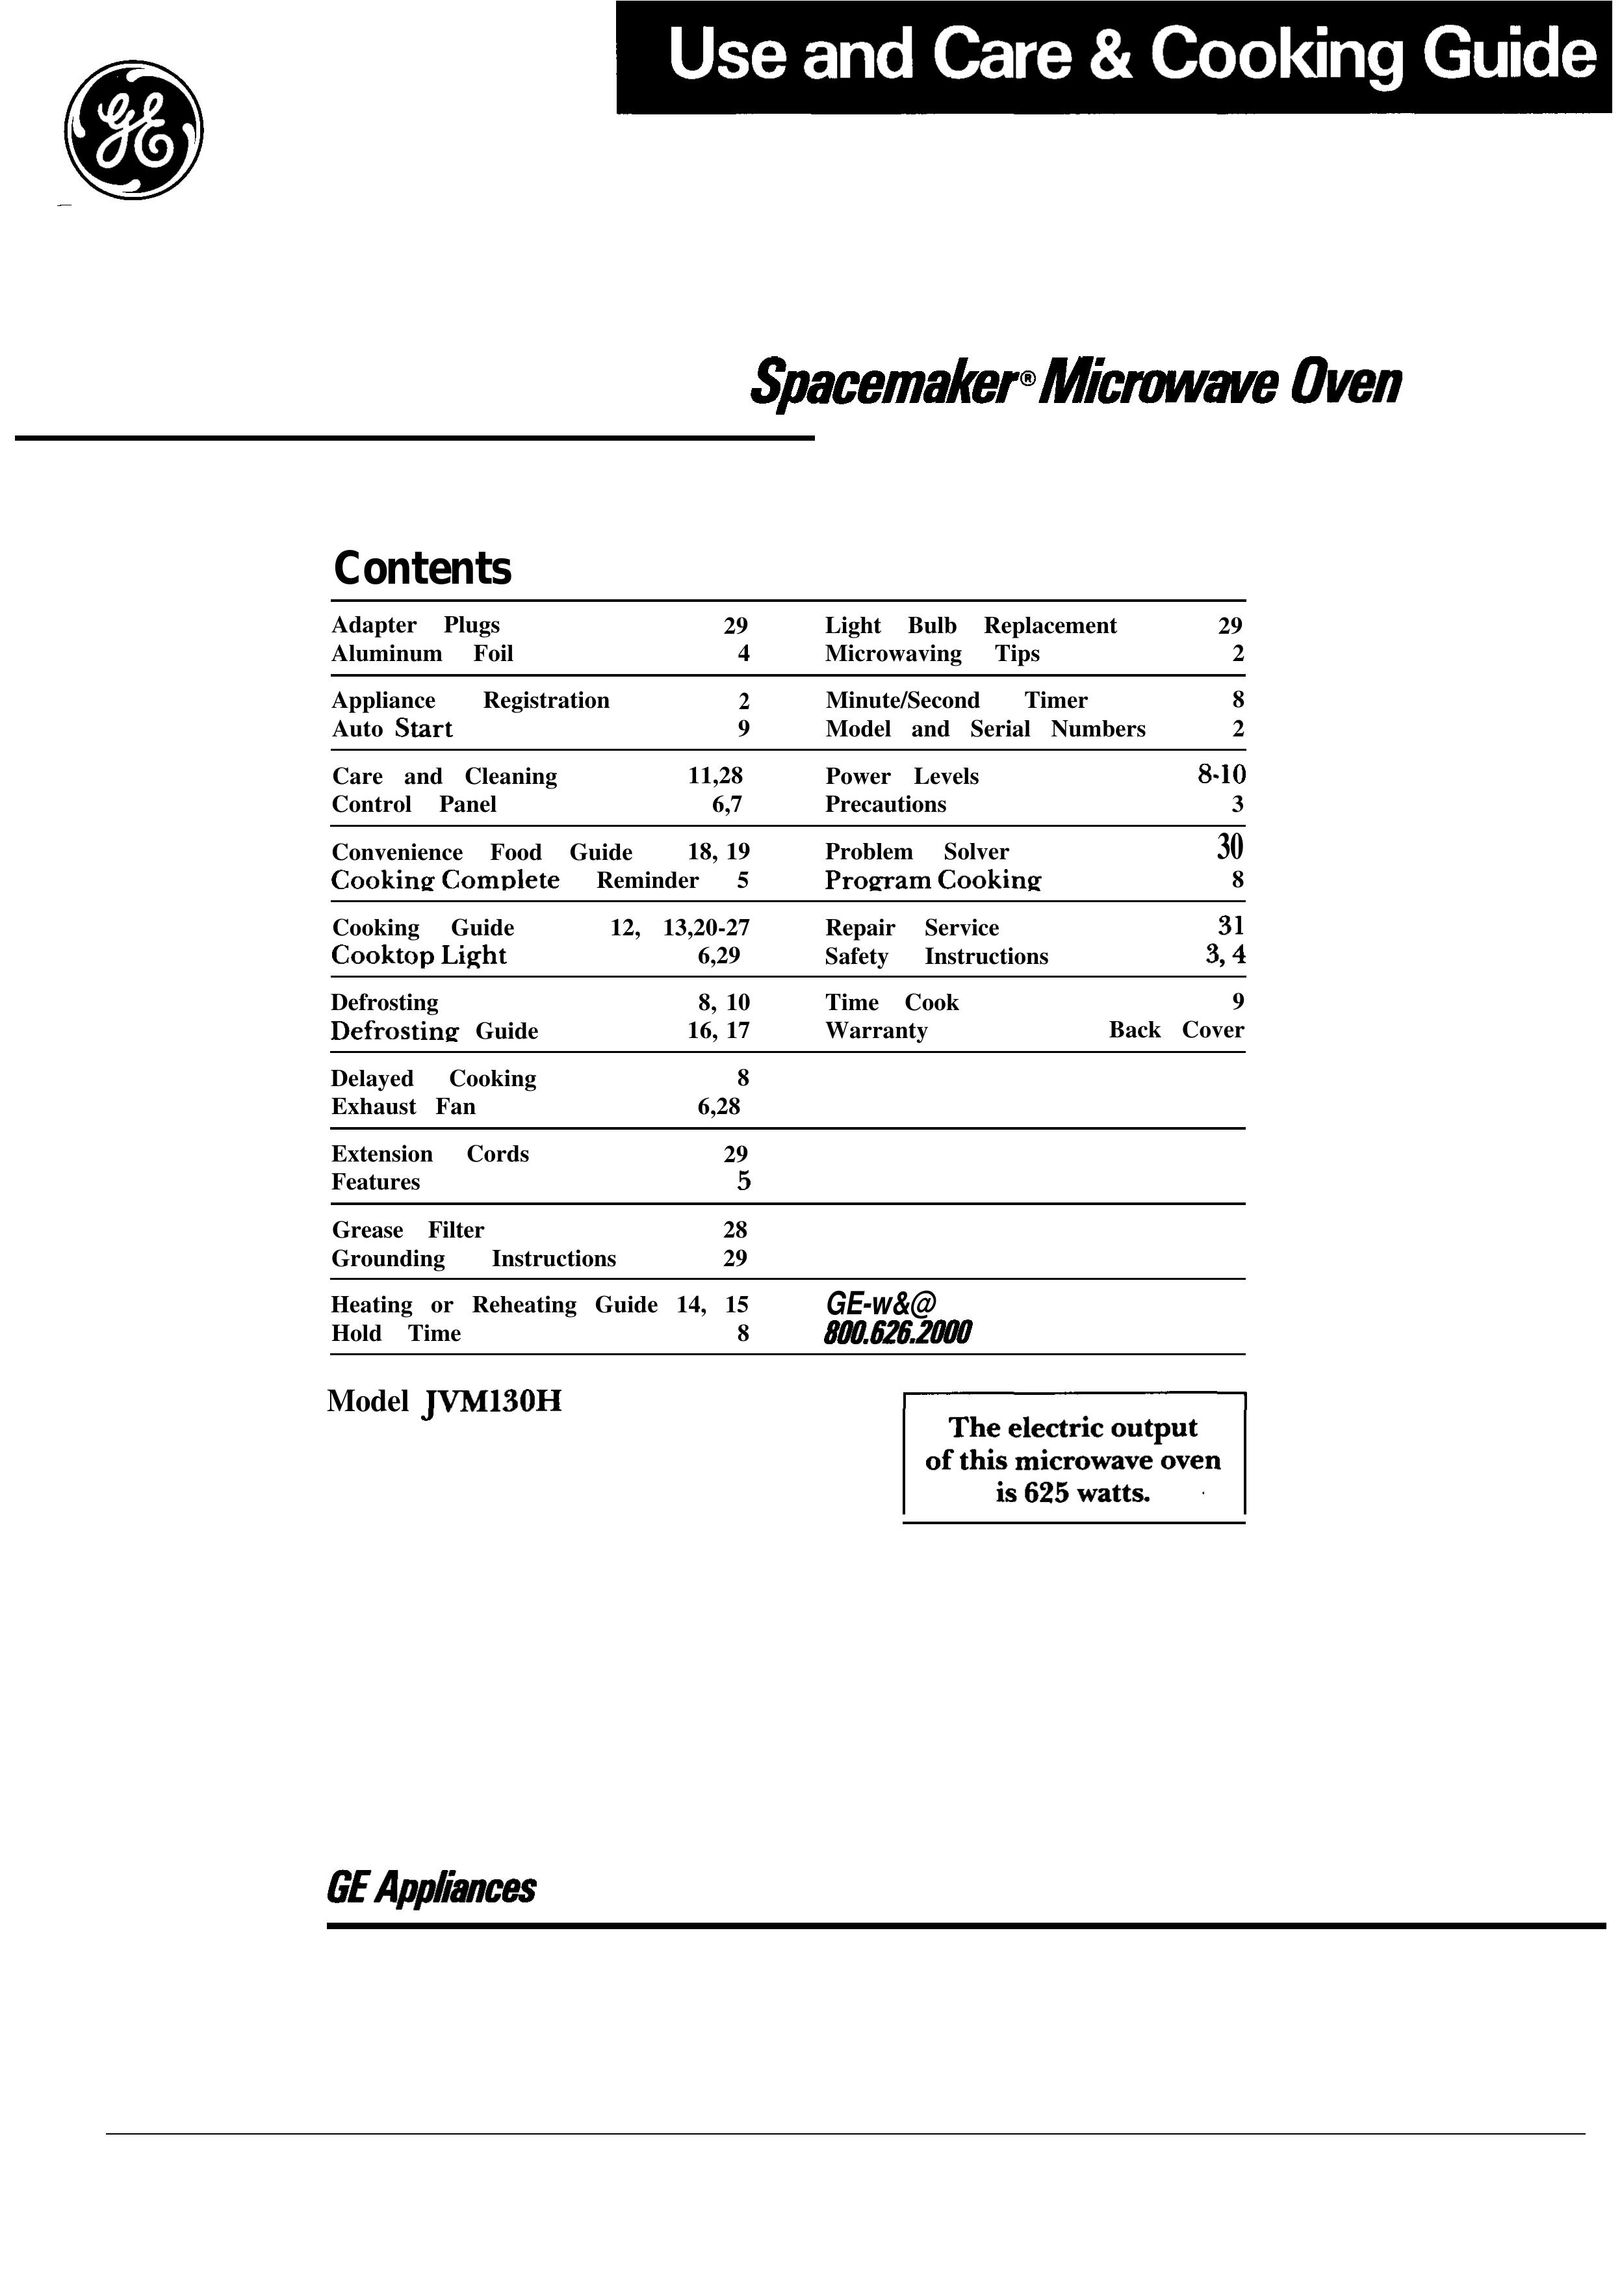 GE 164 D20~PO19 Microwave Oven User Manual